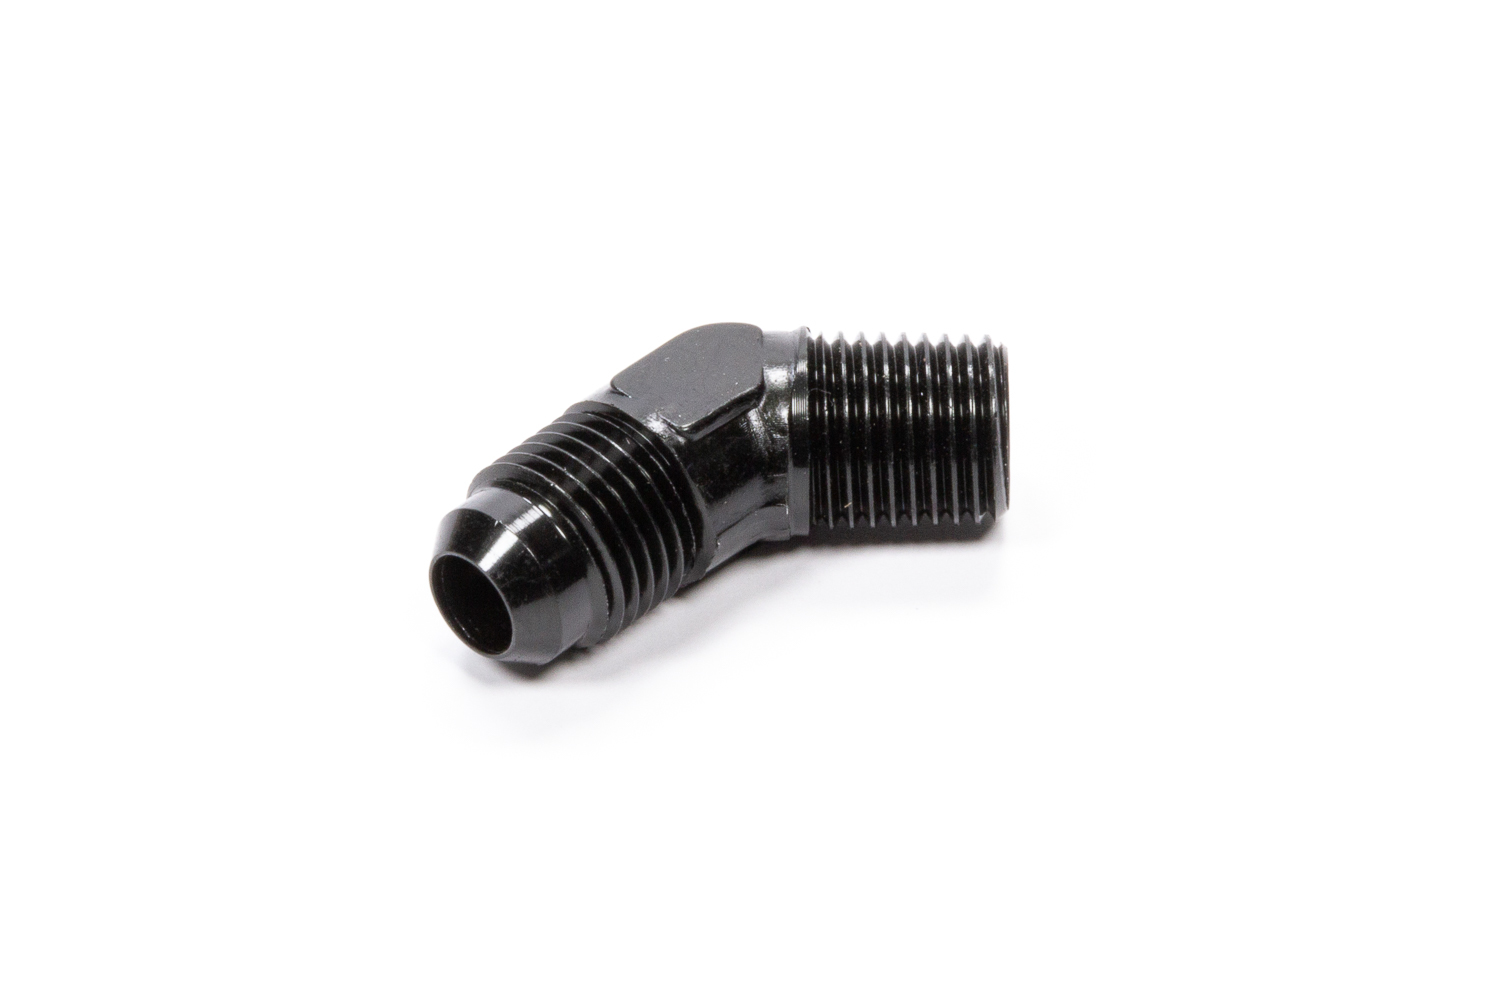 Fragola 482306-BL - Fitting, Adapter, 45 Degree, 6 AN Male to 1/4 in NPT Male, Aluminum, Black Anodized, Each